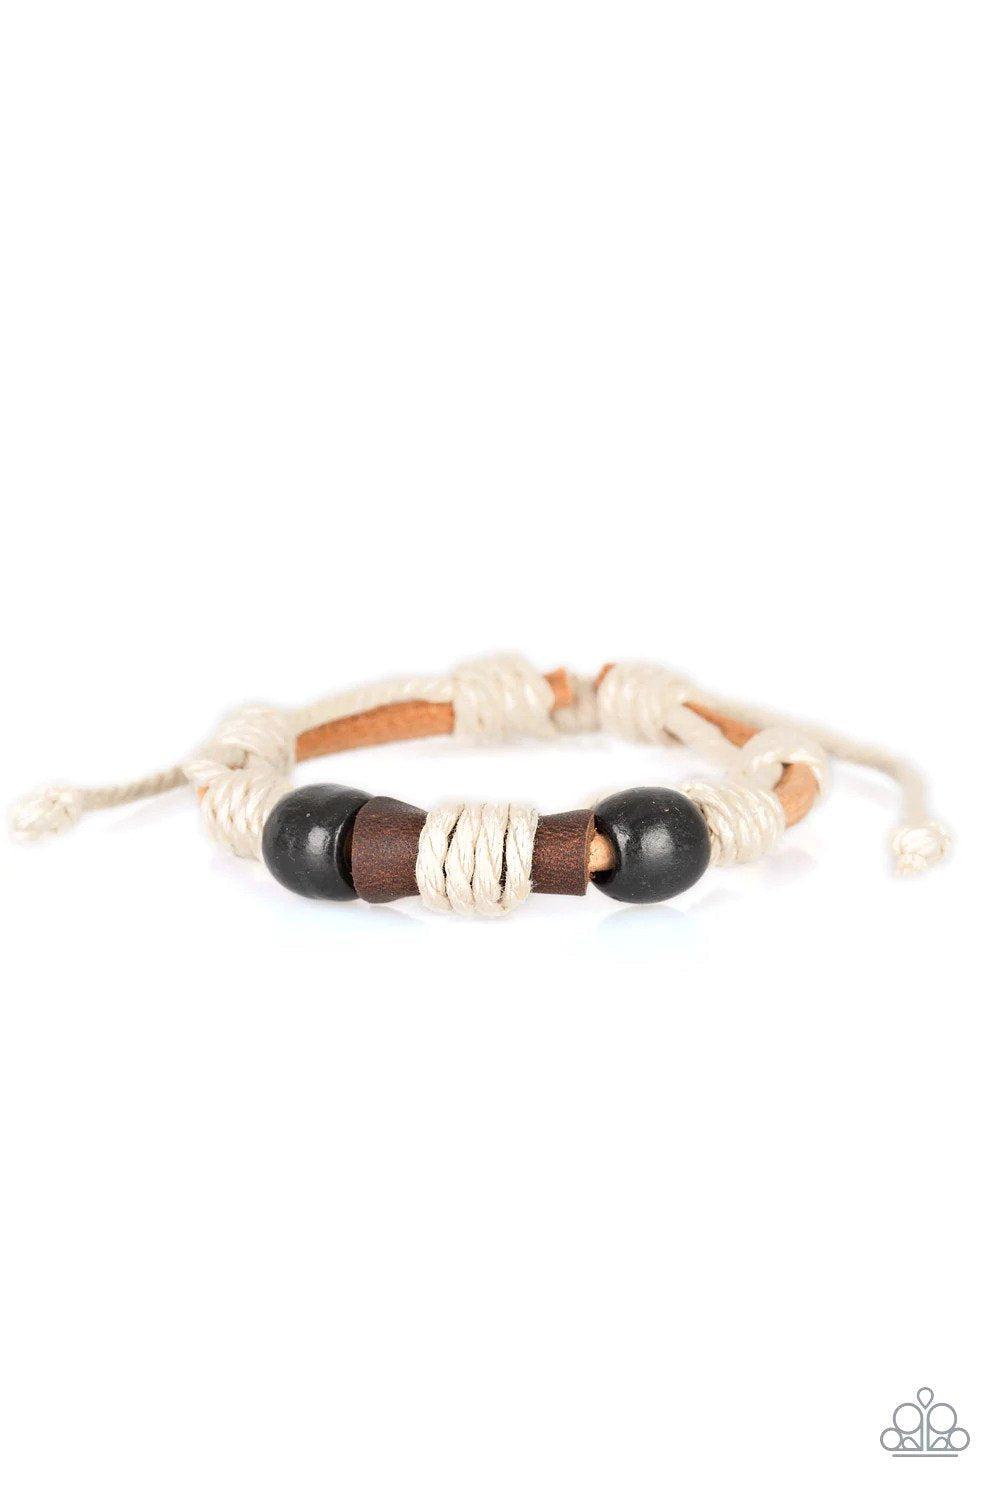 Back In The Backwoods Black &amp; White Urban Bracelet - Paparazzi Accessories- lightbox - CarasShop.com - $5 Jewelry by Cara Jewels